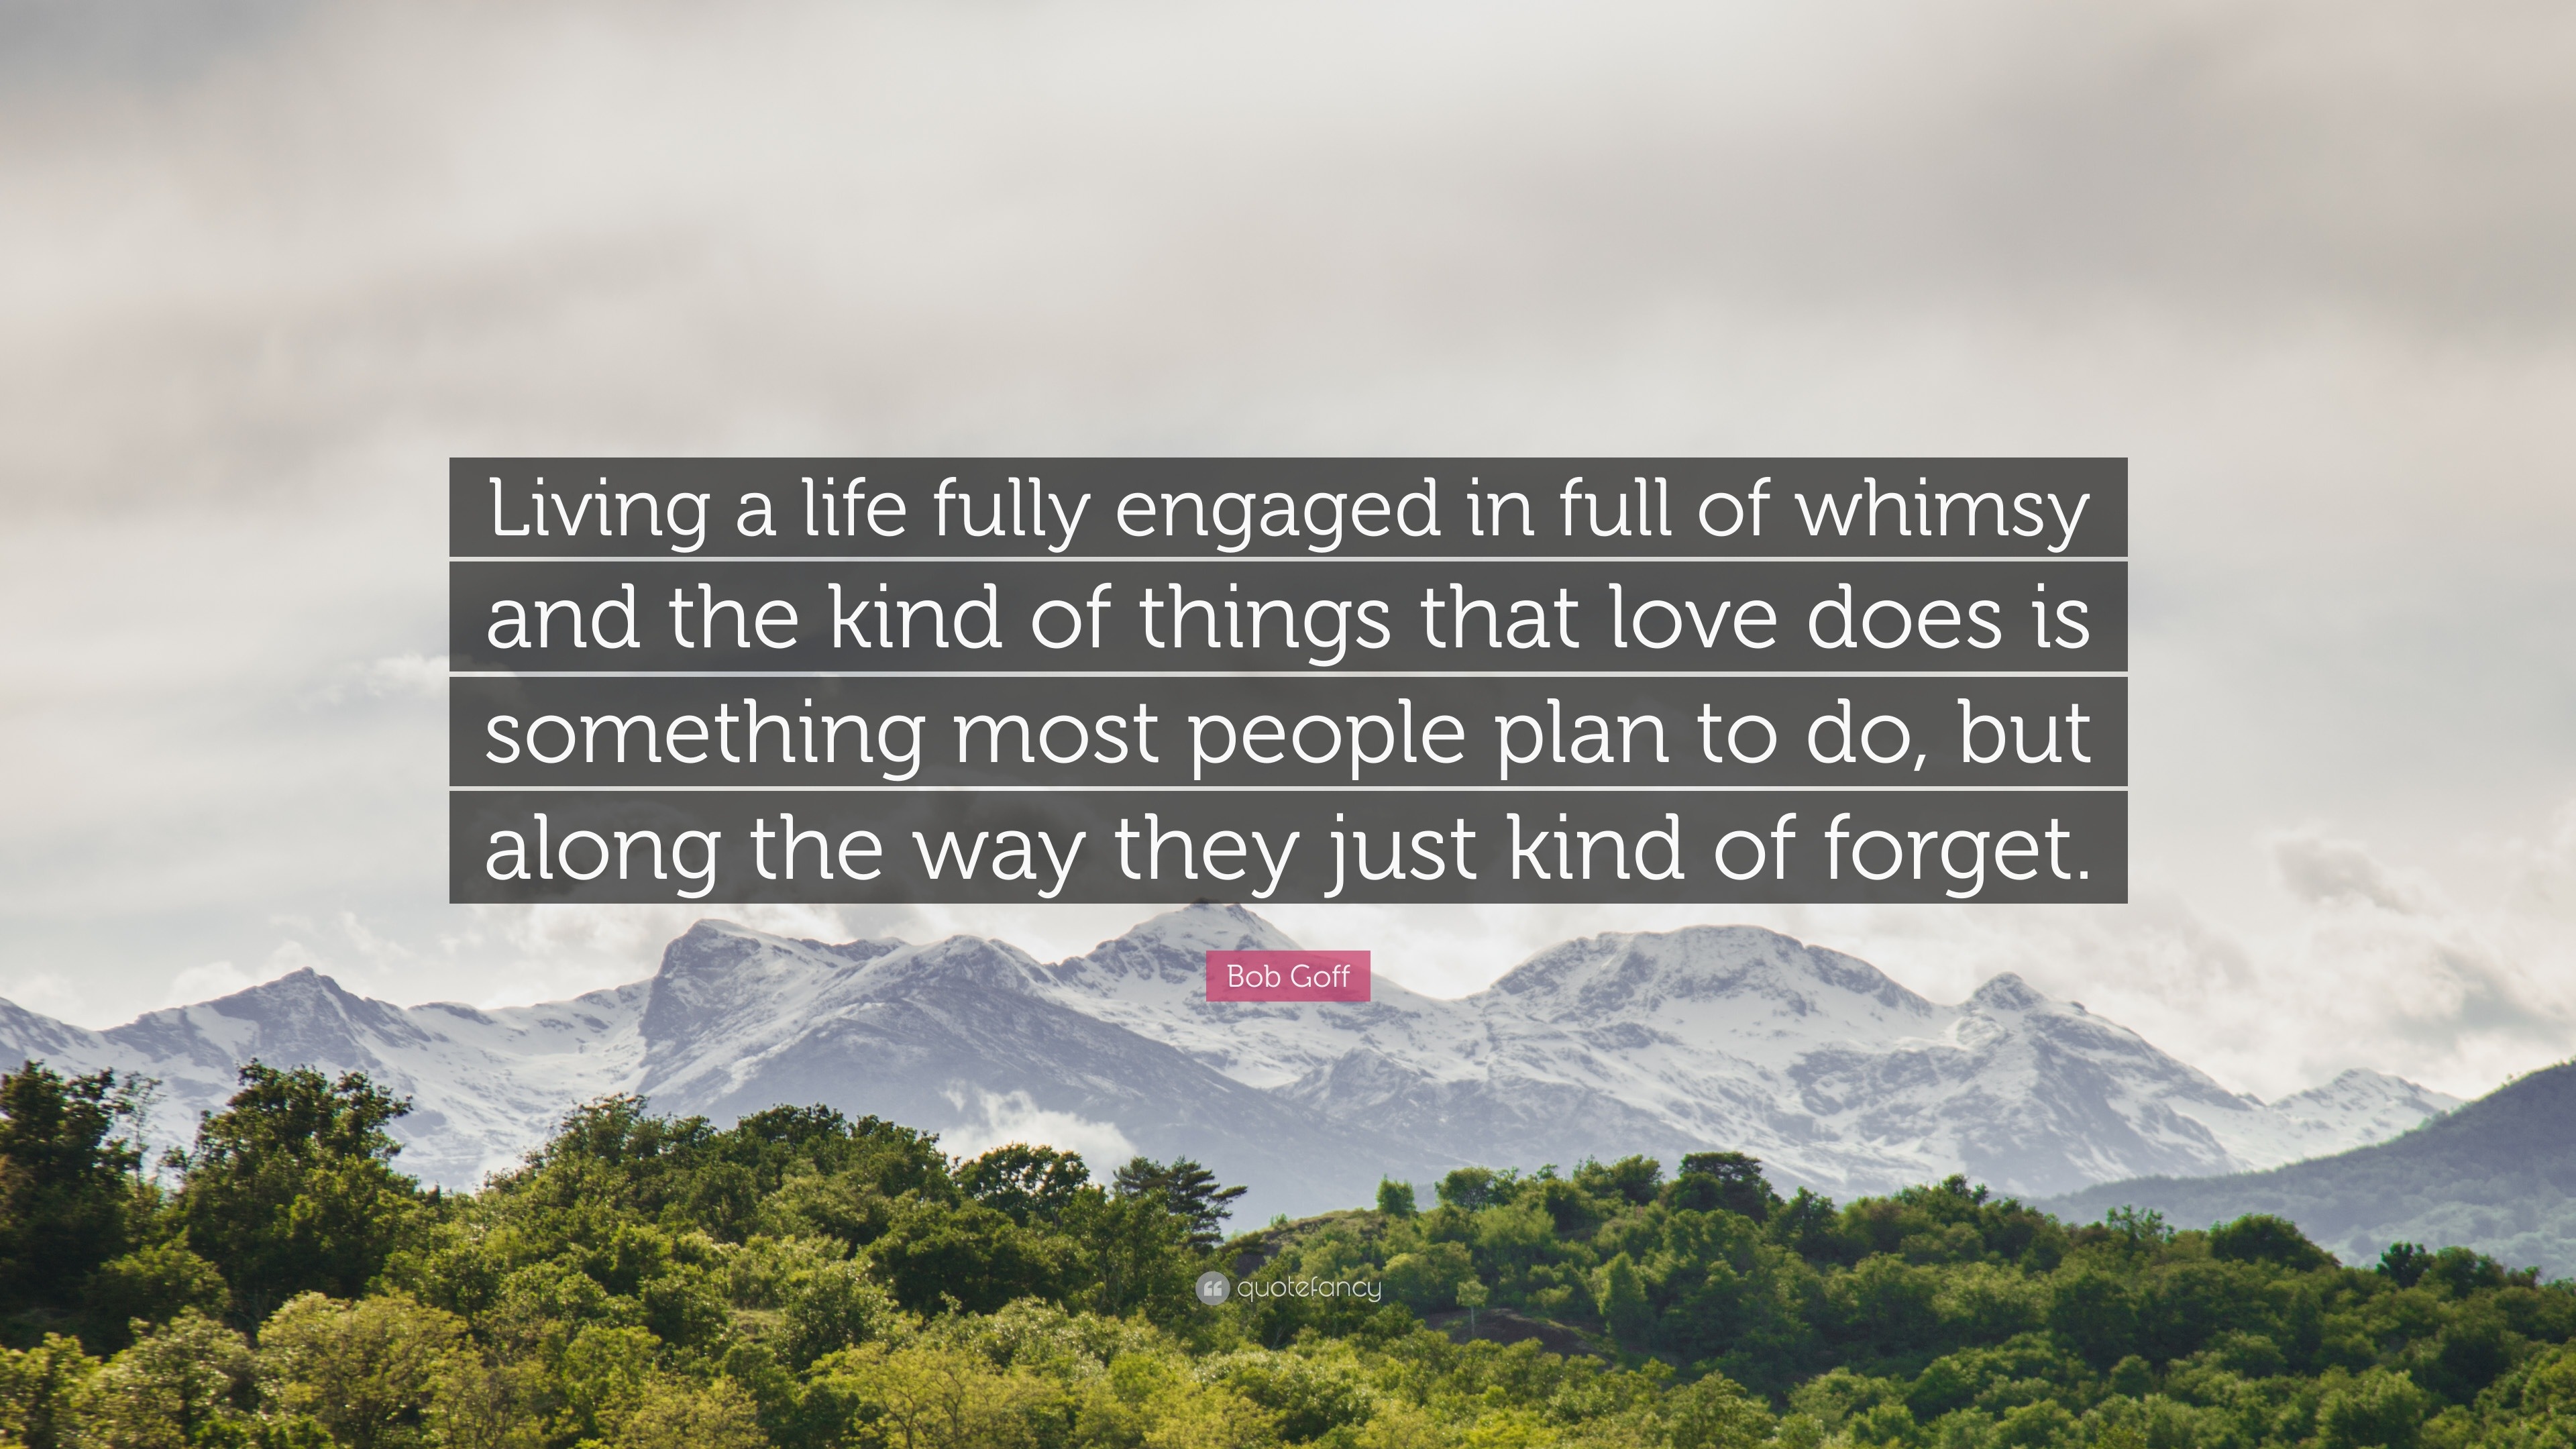 Bob Goff Quote “Living a life fully engaged in full of whimsy and the